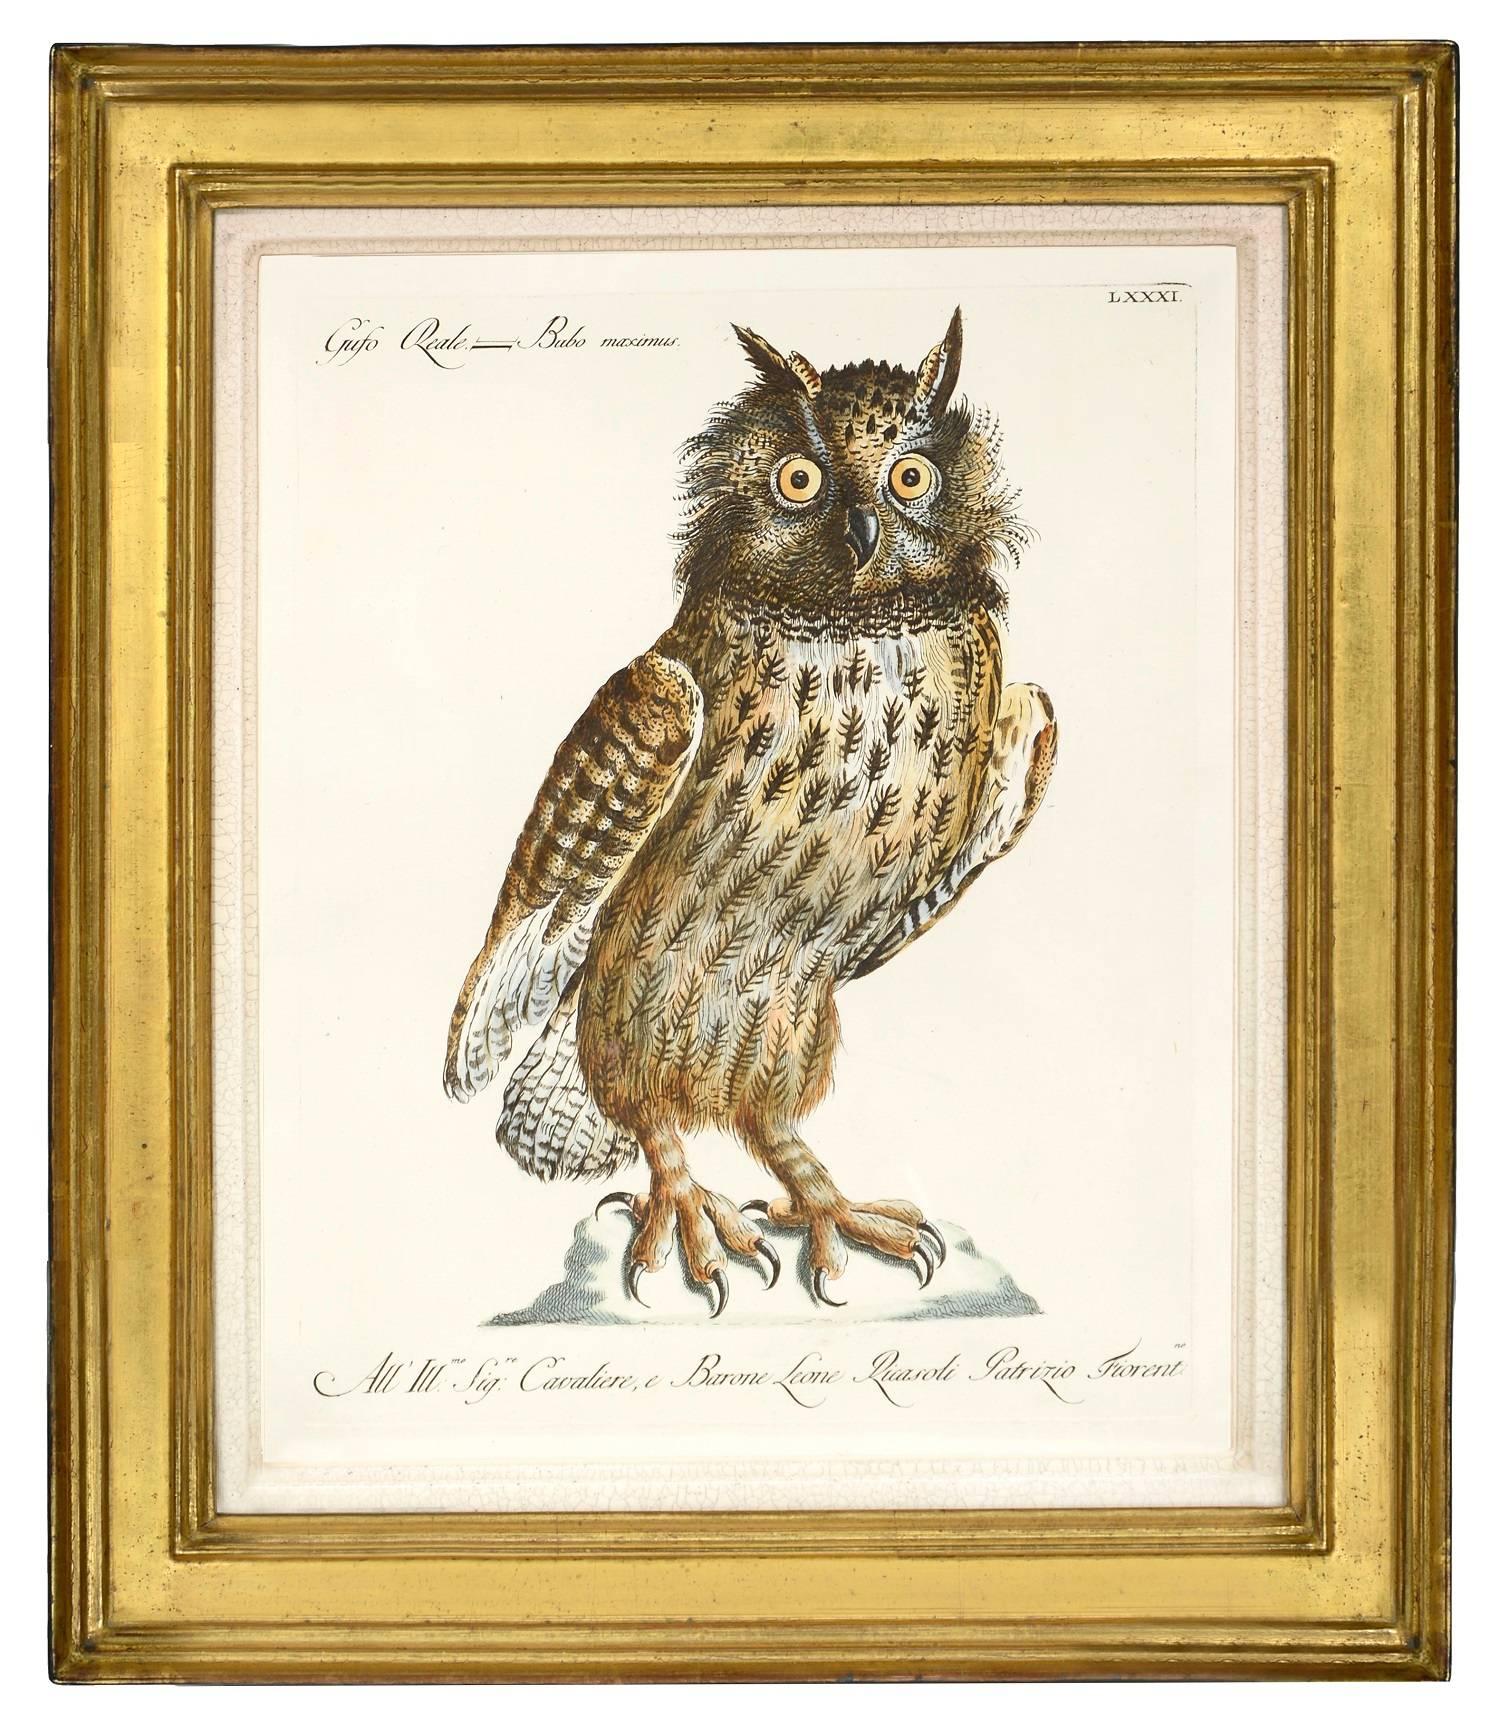 Hand-coloured etching, with engraving. Original colour. Very good condition with strong, fresh colour and full margins.  Framed and glazed, overall dimensions: 
41.5 by 49.5 cm.
Storia naturale degli uccelli... was one of the finest bird books